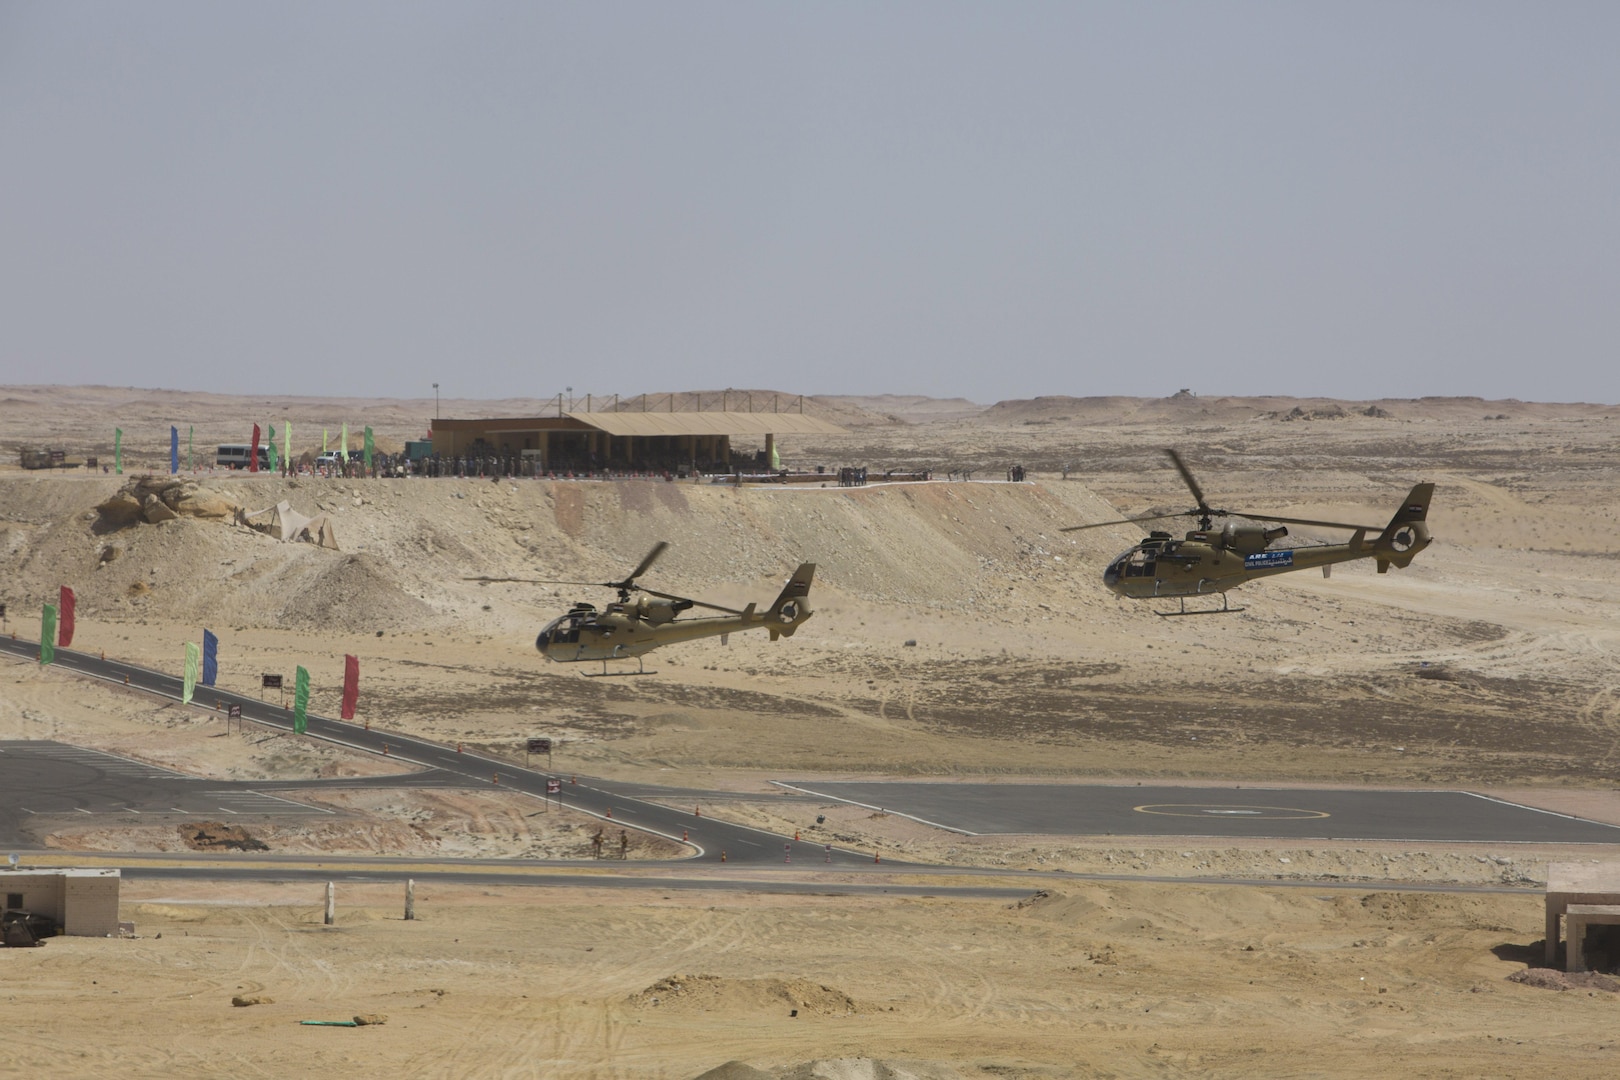 Two Egyptian Aérospatiale Gazelle helicopters fly in the foreground of a spectator veiwing area at the final combined arms live fire exercise during Bright Star 2017. Exercise Bright Star 2017 is a combined command-post and field training exercise aimed at enhancing regional security and stability by responding to modern day security scenarios with the Arab Republic of Egypt. (U.S. department of Defense photo by Tom Gagnier